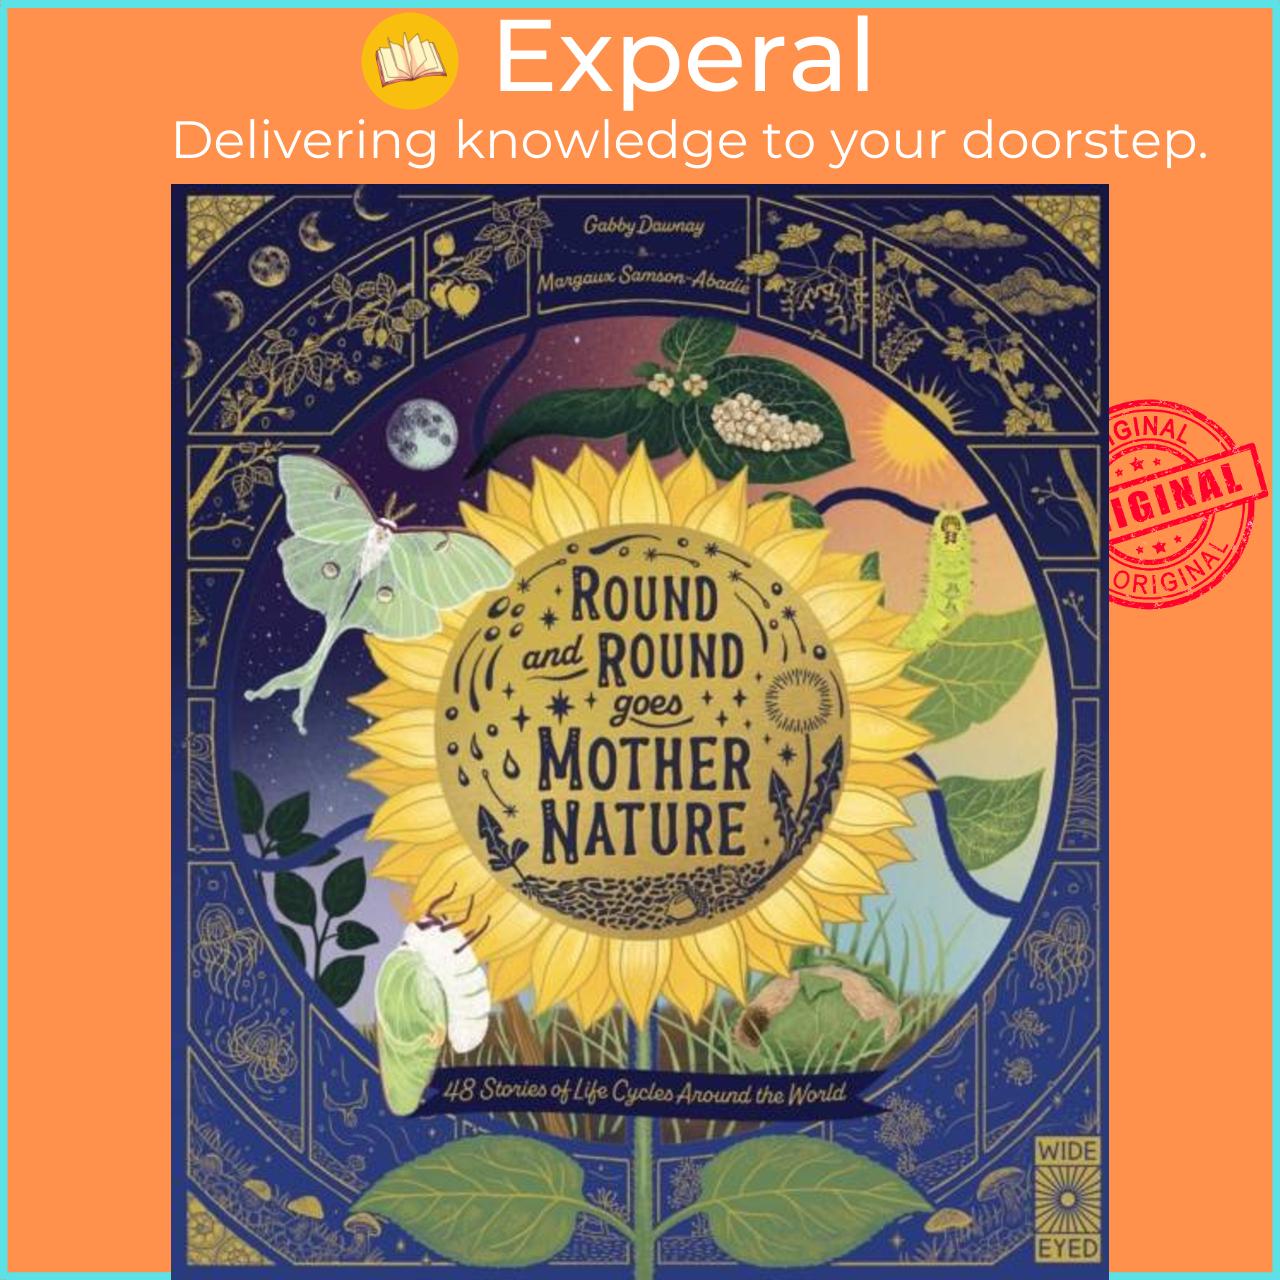 Hình ảnh Sách - Round and Round Goes Mother Nature - 48 Stories of Life Cycles A by Margaux Samson Abadie (UK edition, hardcover)